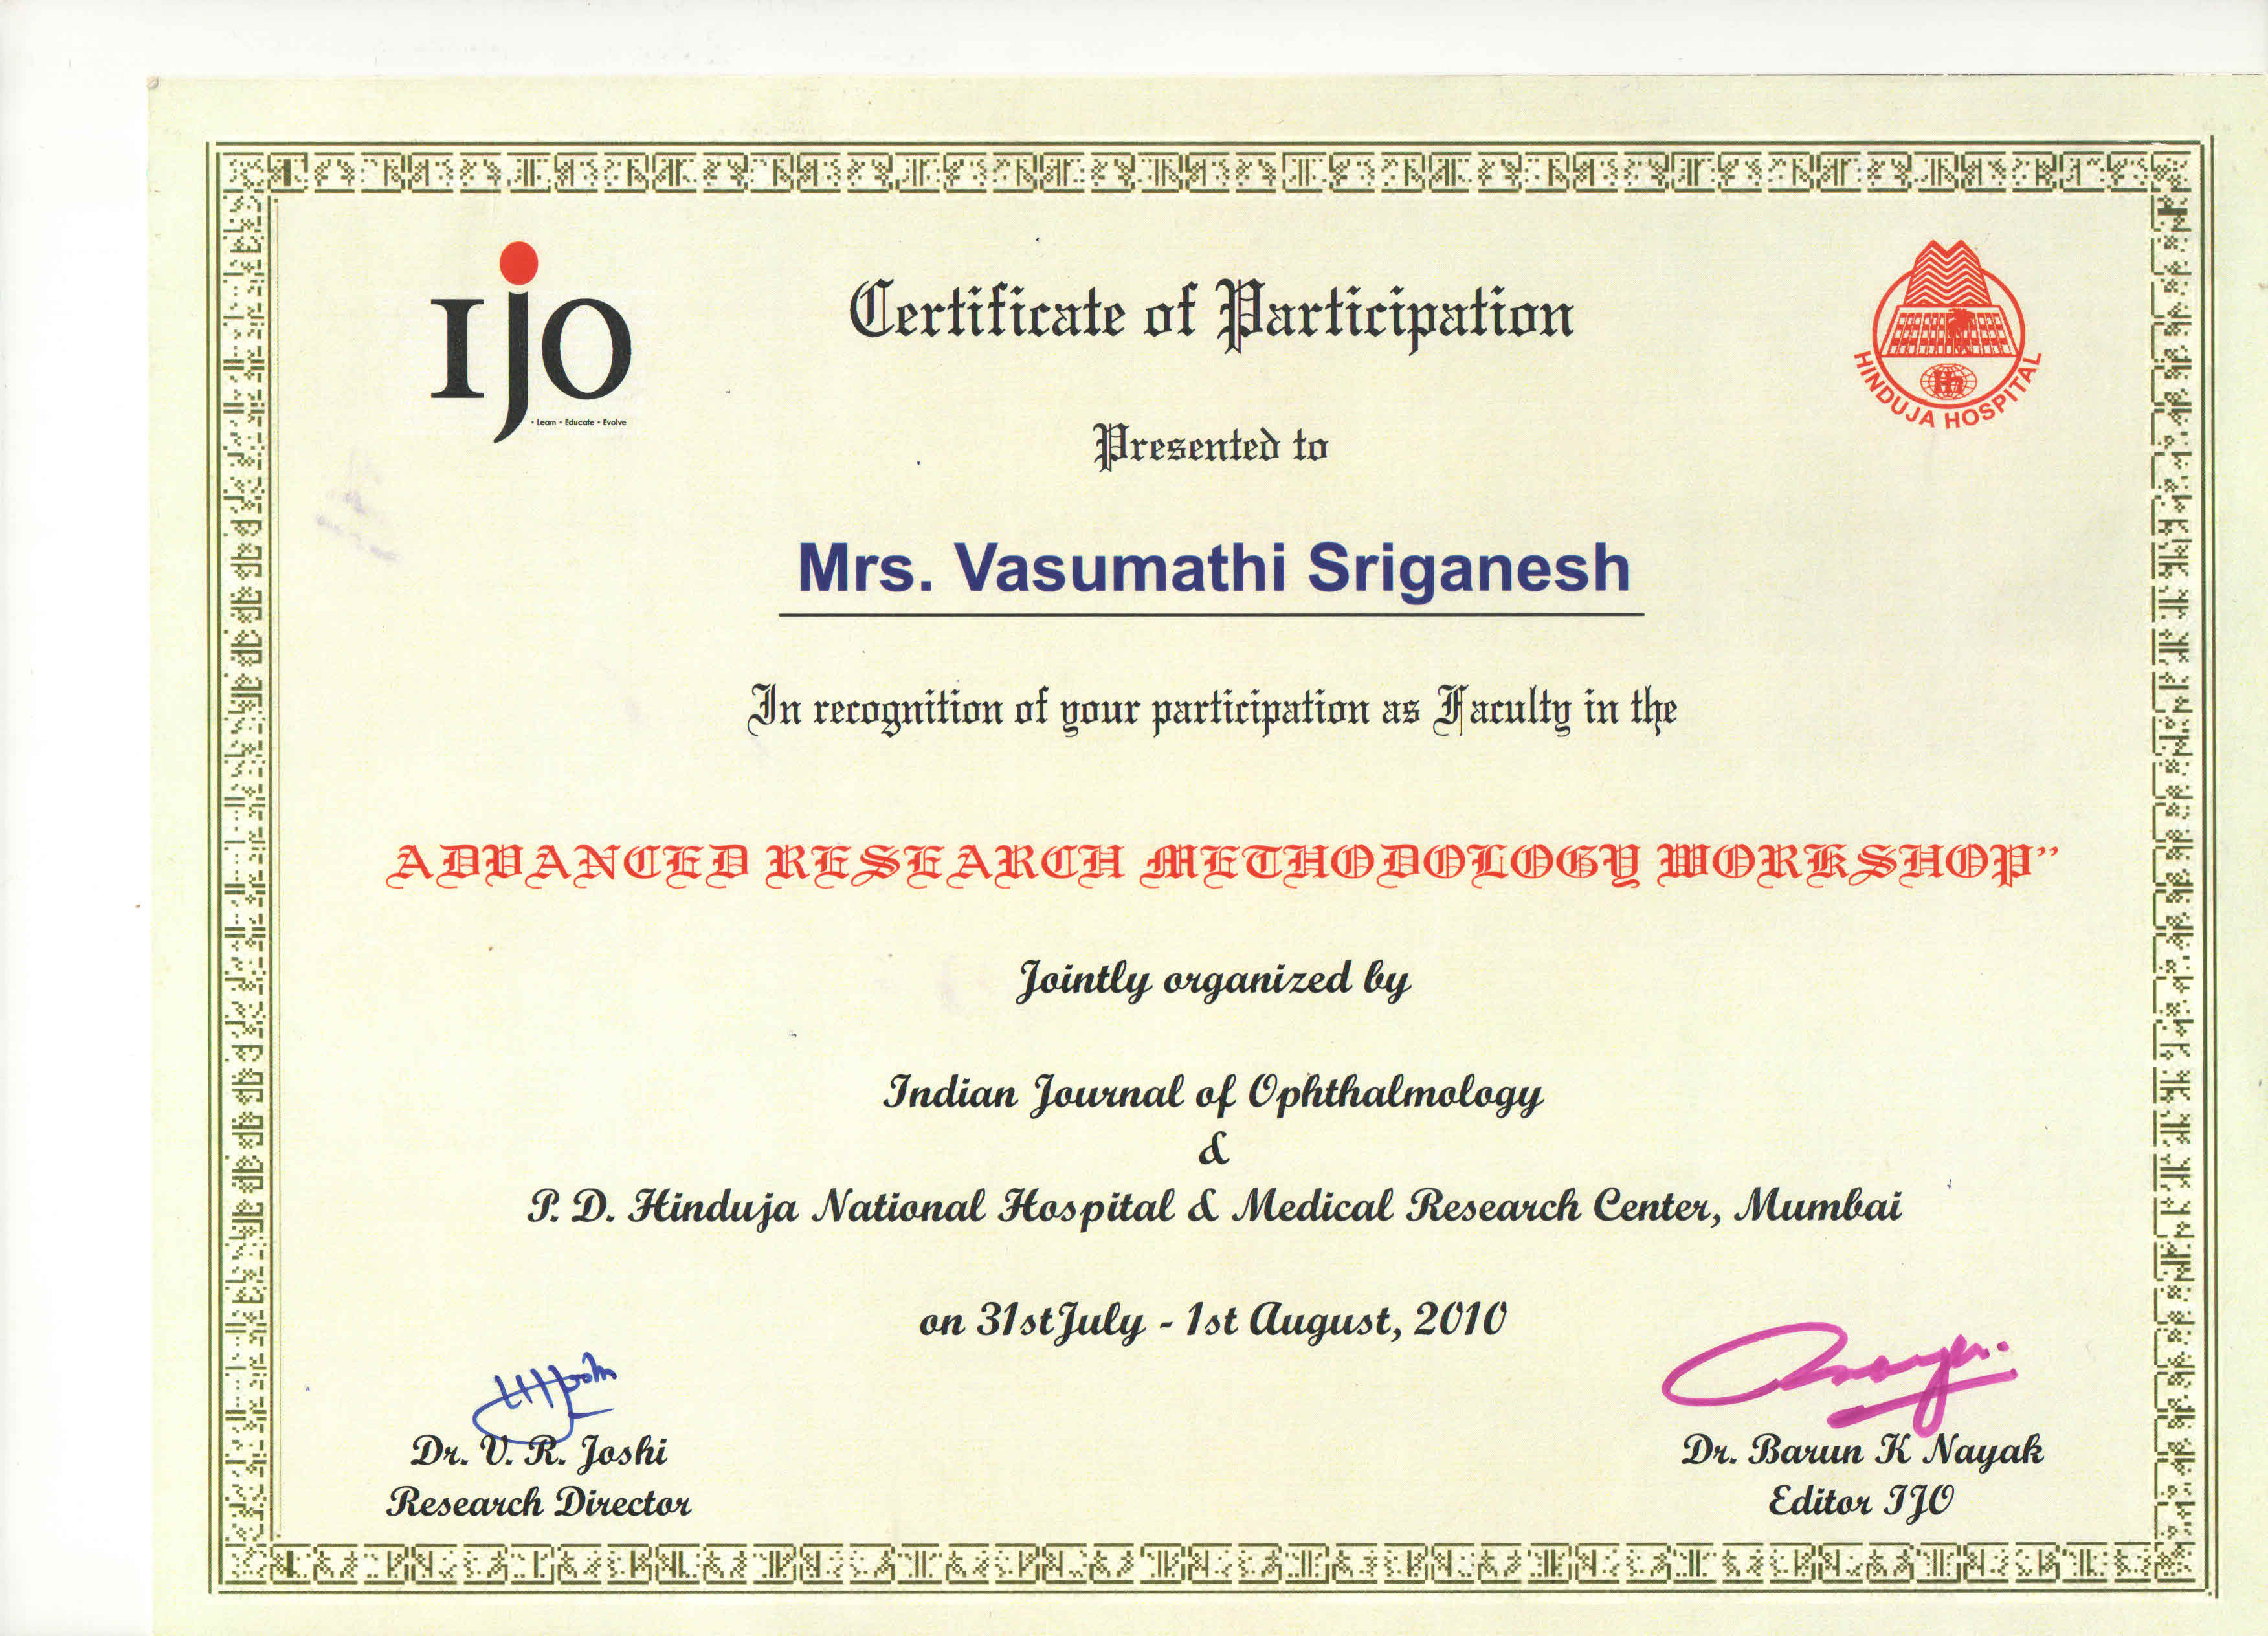 Indian Journal of Ophthalmology (IJO)-Lecture